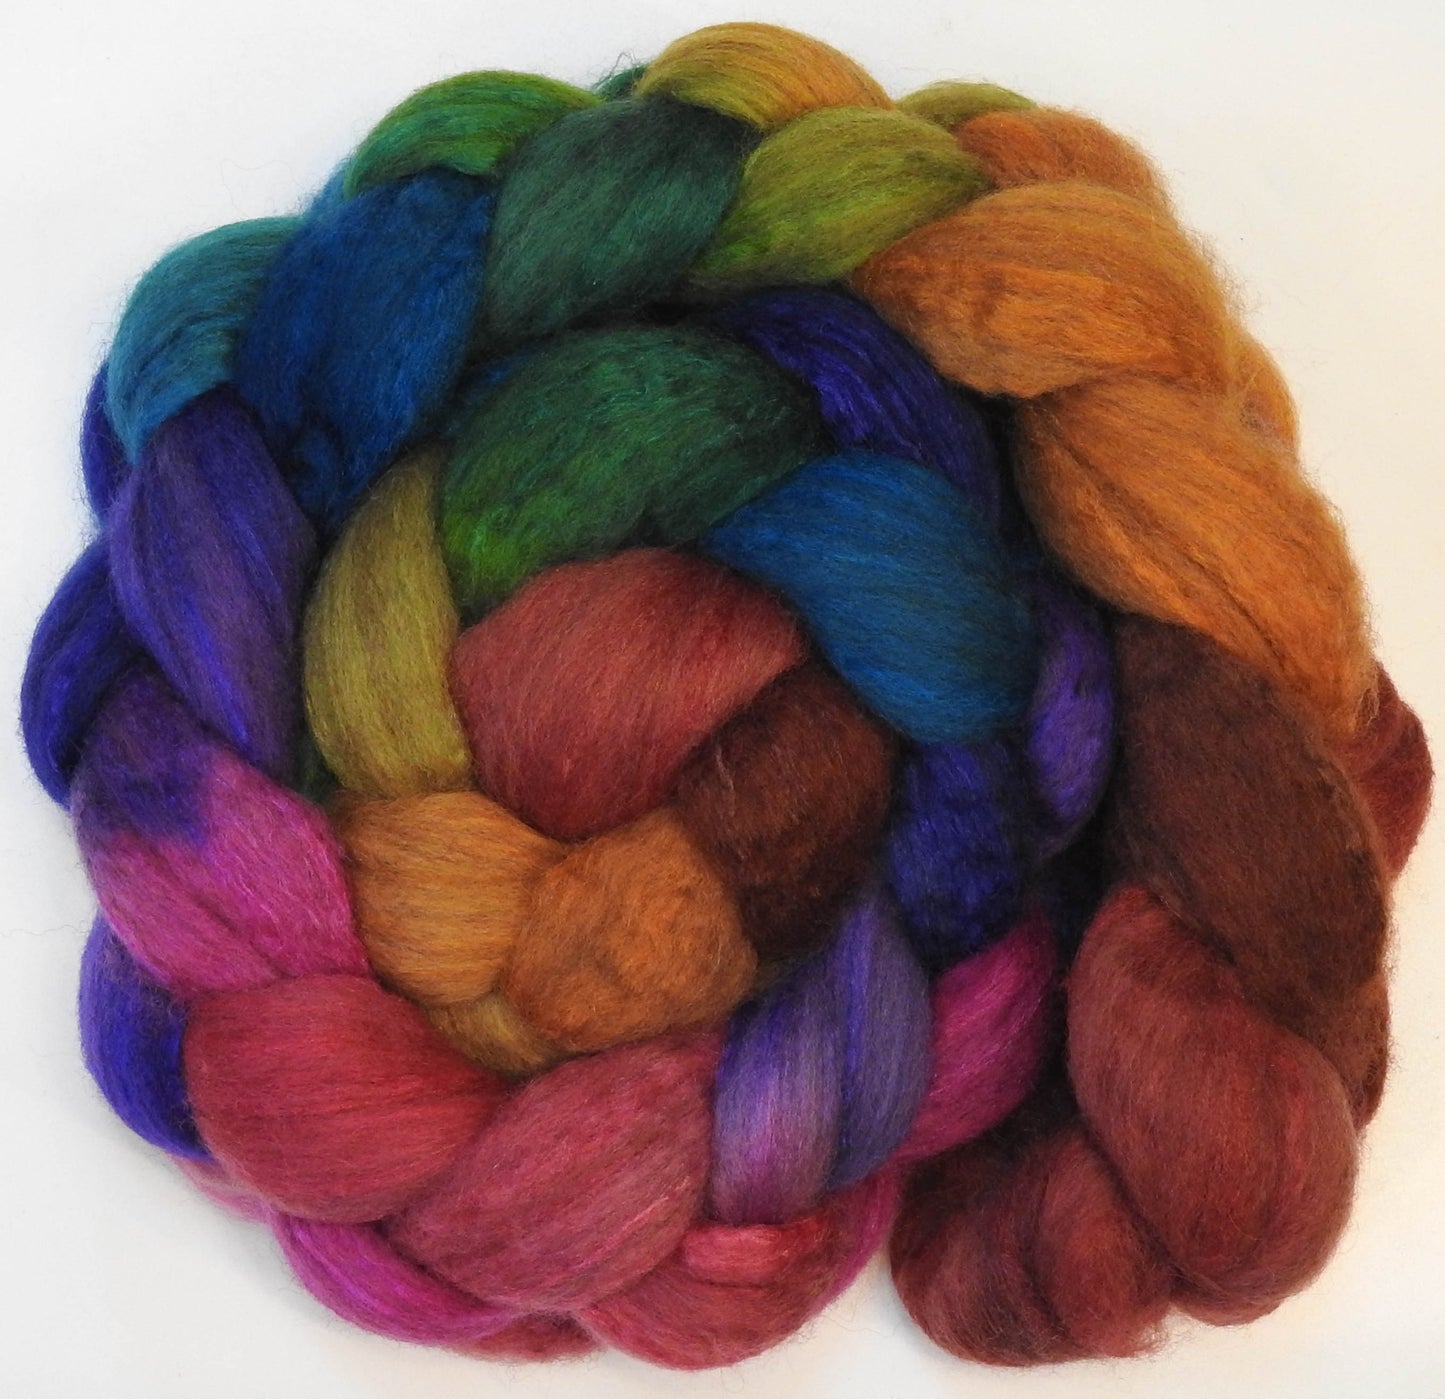 End of the Rainbow (light)-Mixed Bfl/tussah silk ( 85/15)- (5.6 oz.)